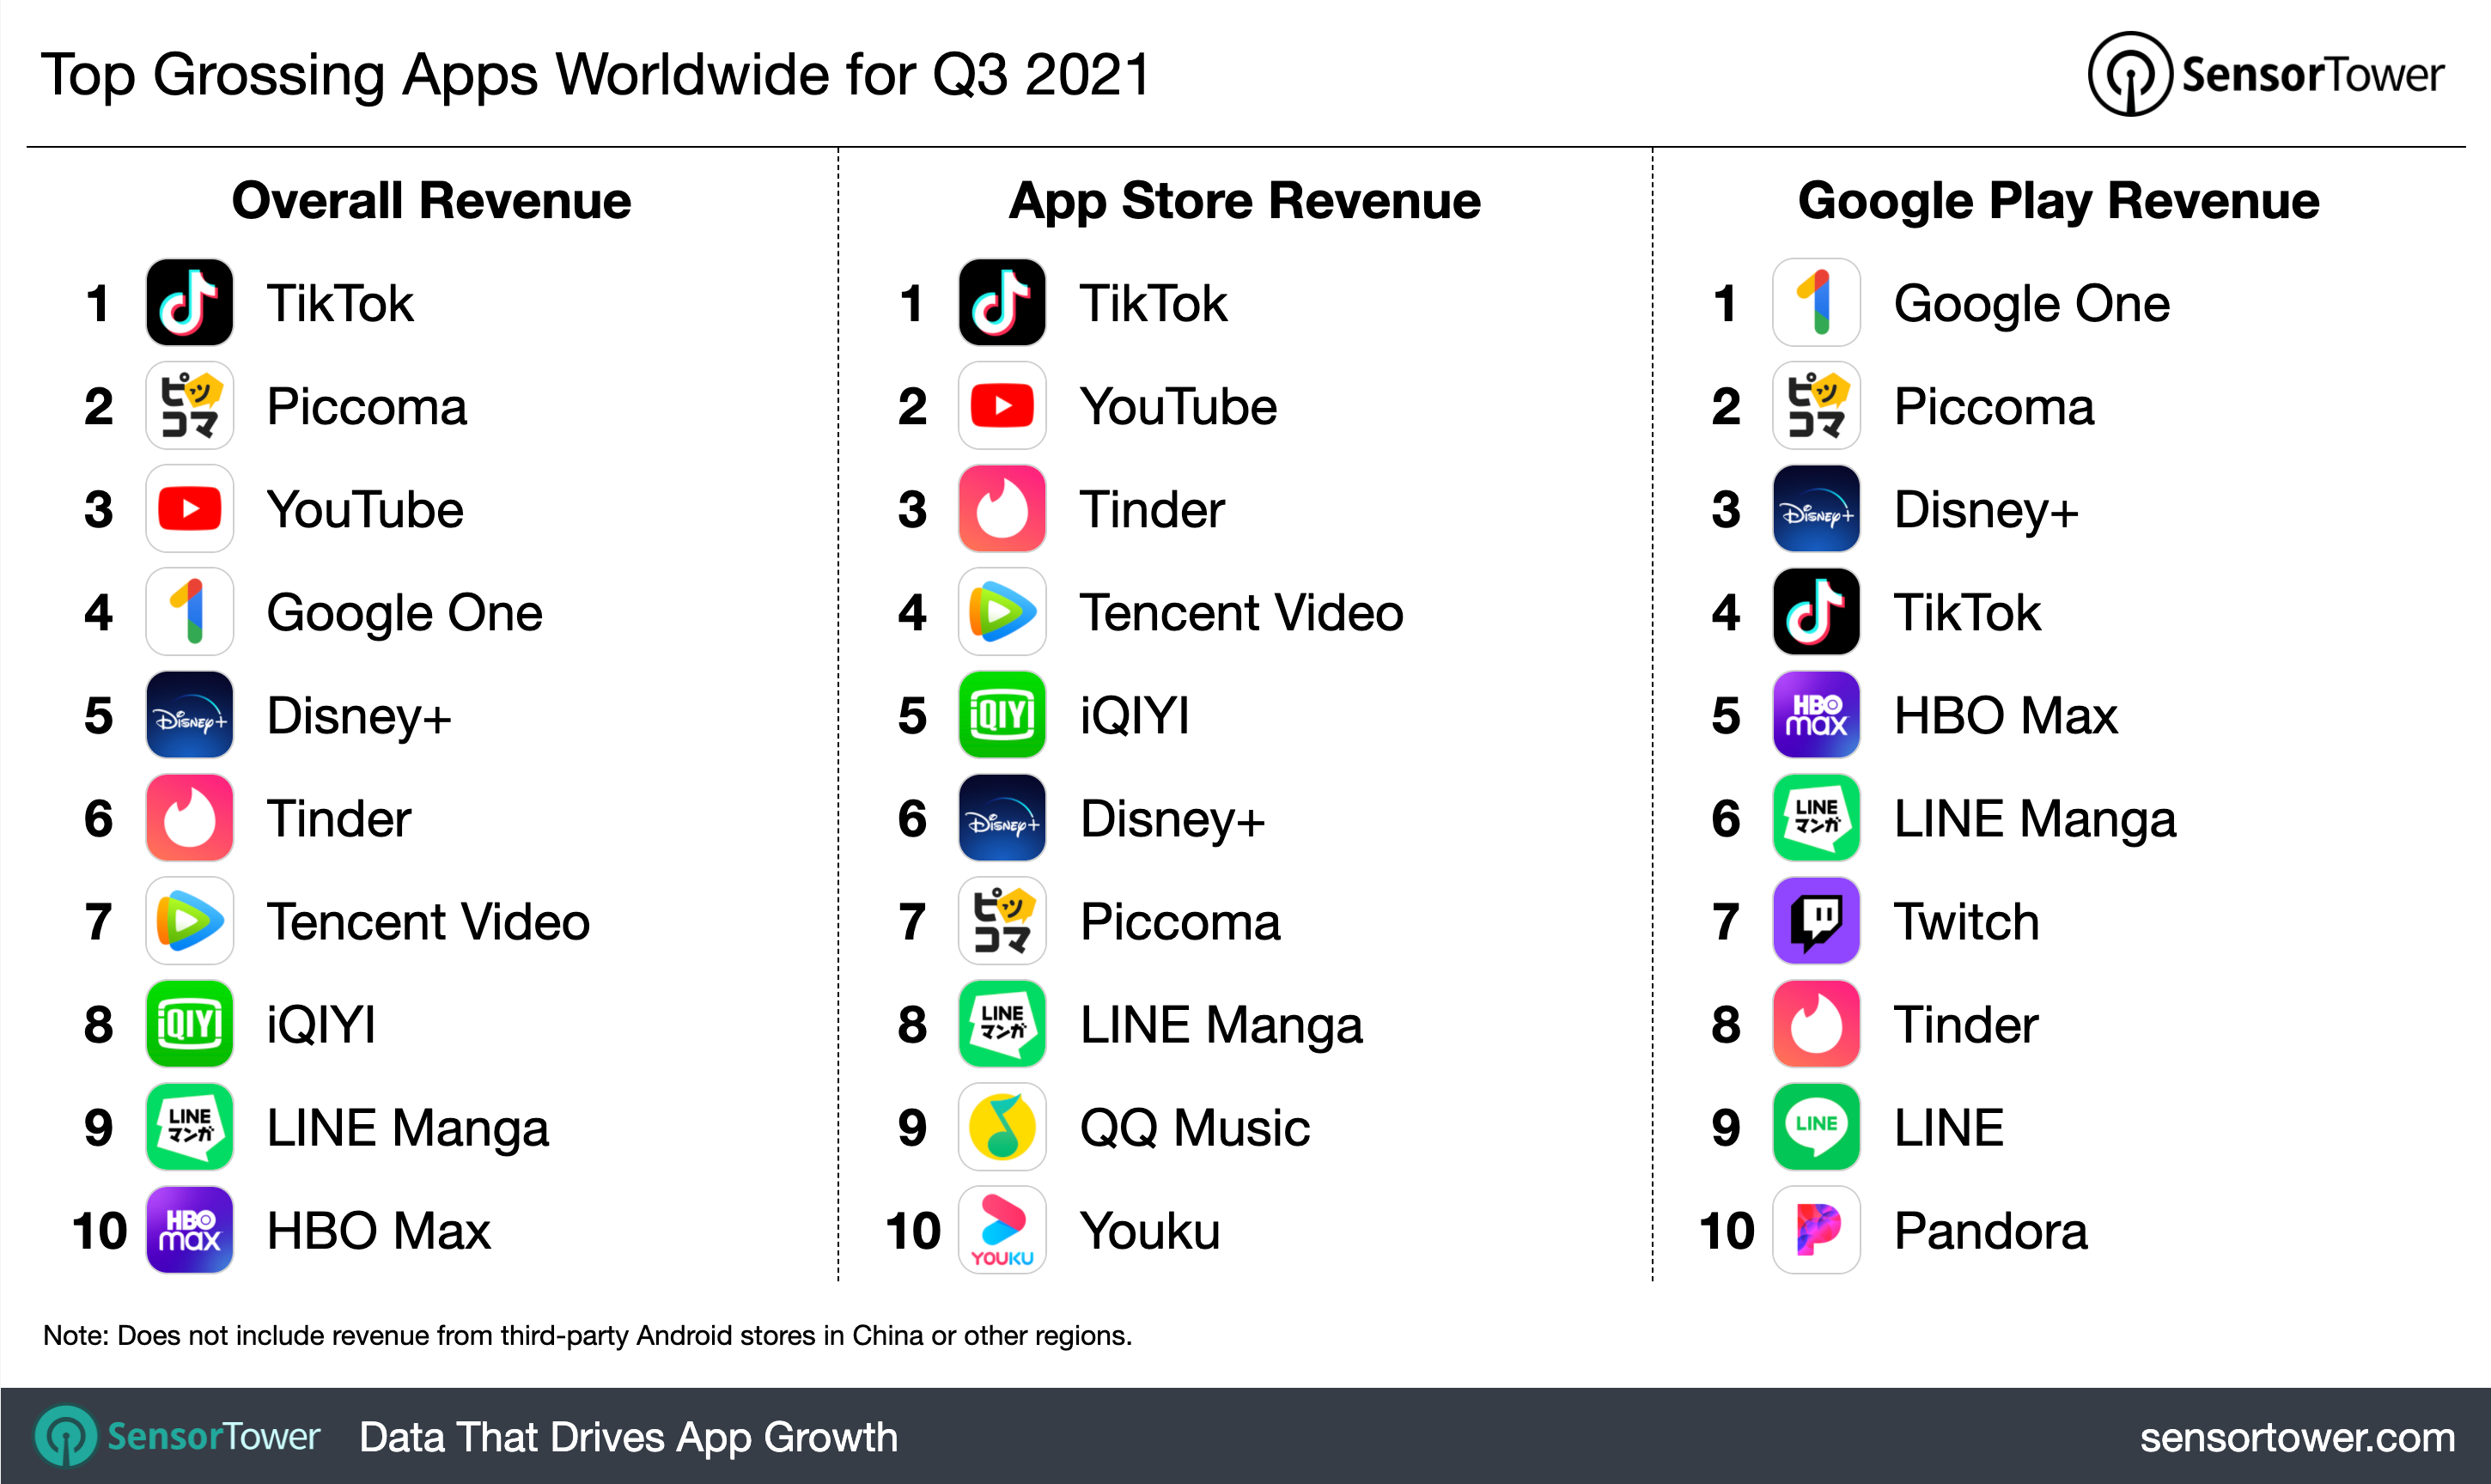 TikTok was the highest-earning app overall in 3Q21.